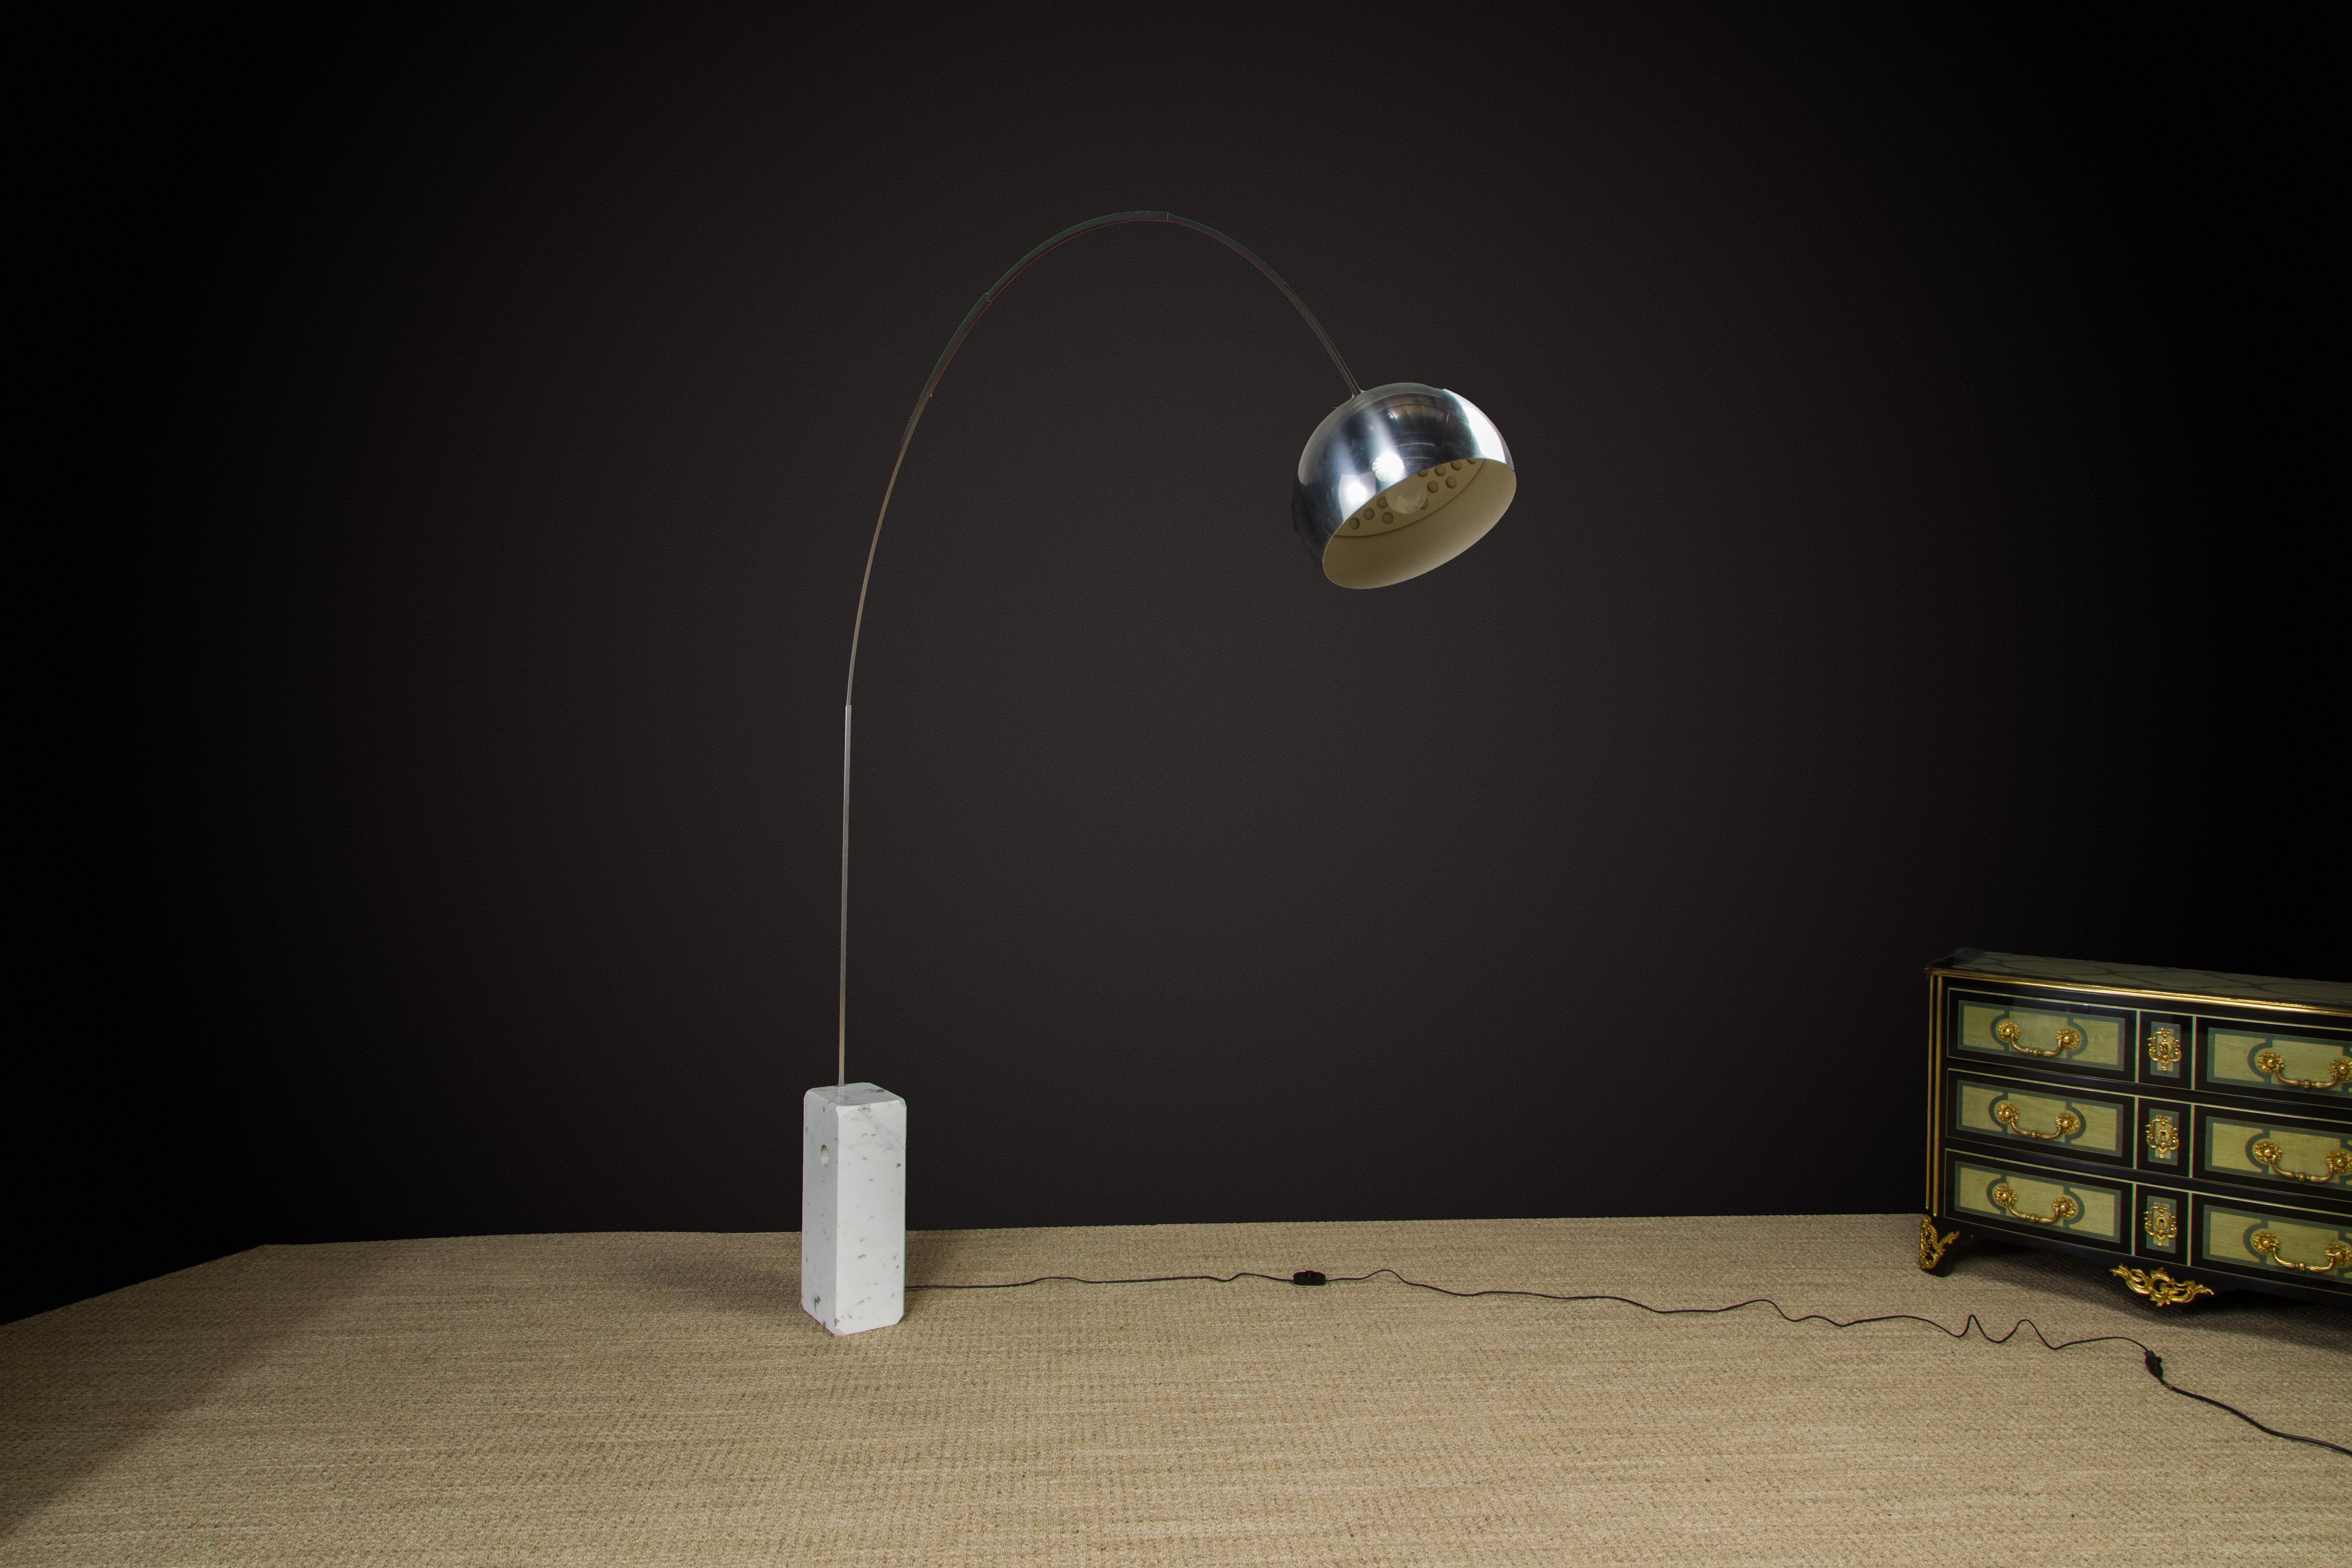 A beautiful early production and signed 'Arco' adjustable floor lamp by the Castiglioni brothers (Achille & Pier Giacomo Castiglioni) for Flos, Italy. Designed in 1962, this early production example produced circa 1970s.  Signed on both the inside